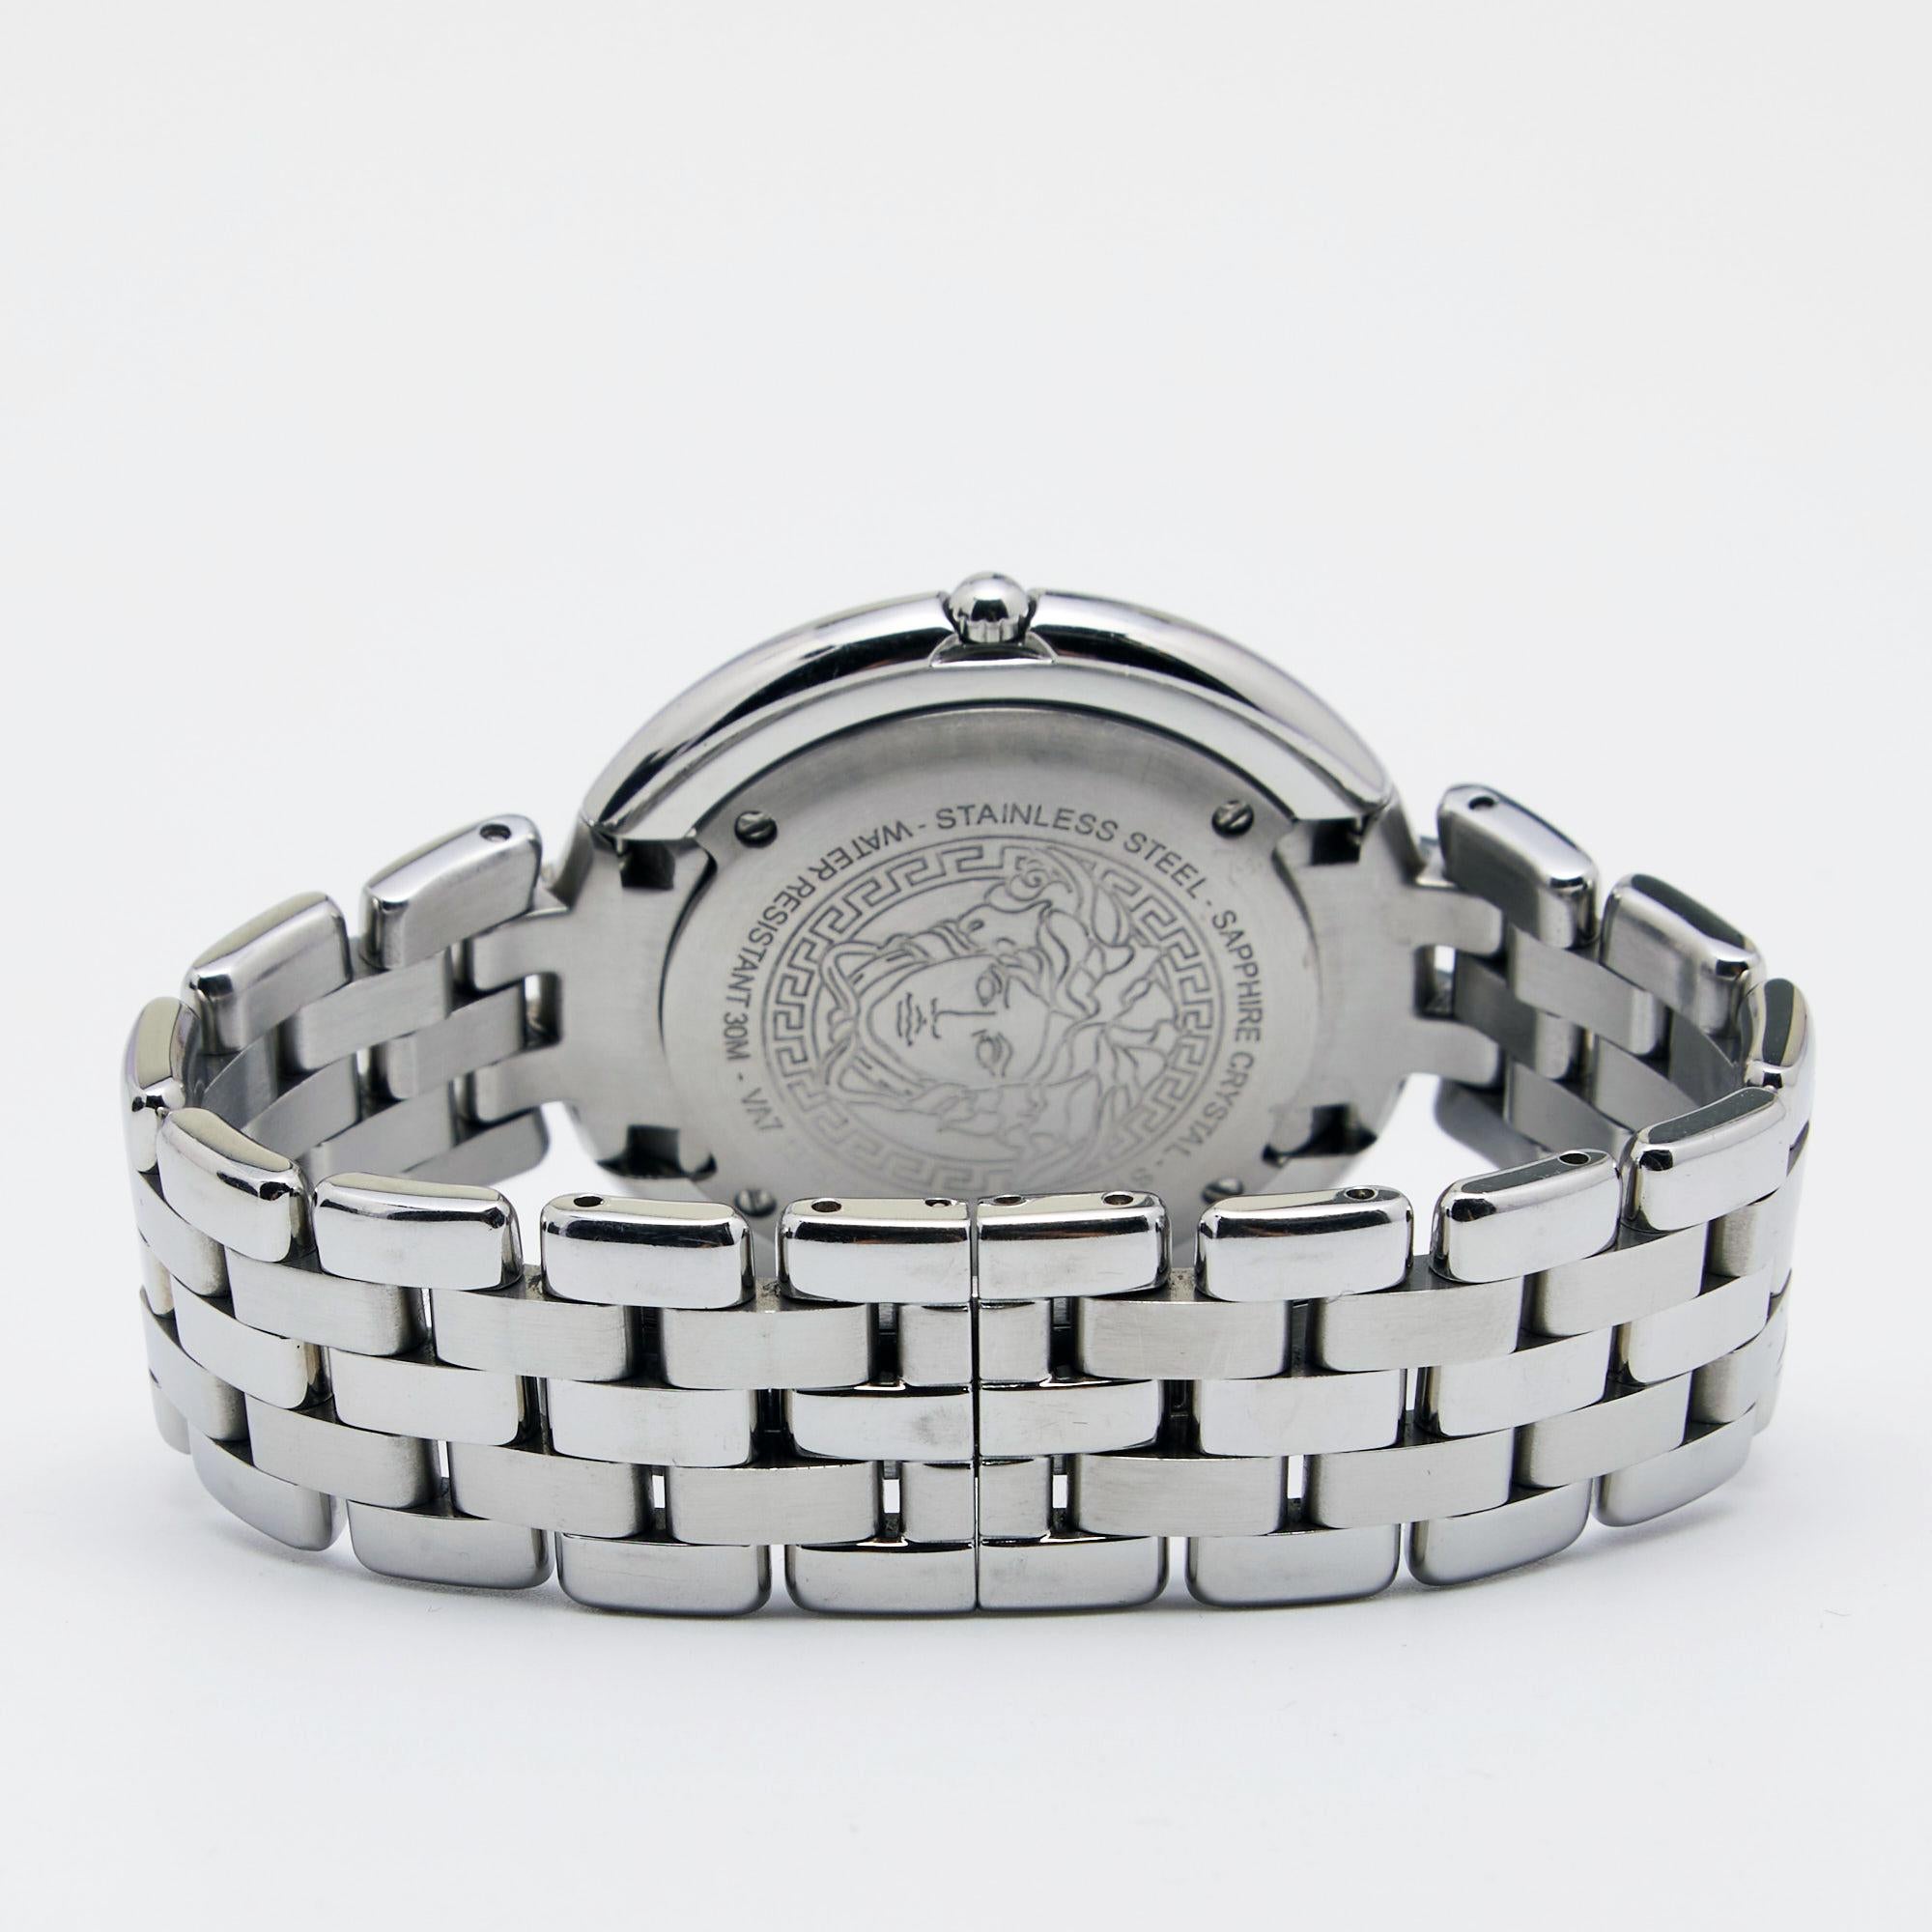 Simplicity and elegance find their way into a perfect combination for this stunning watch by Versace. Crafted using stainless steel, this quartz watch is packed with House codes and textured patterns for a stunning finish.

Includes: 4 Extra Links